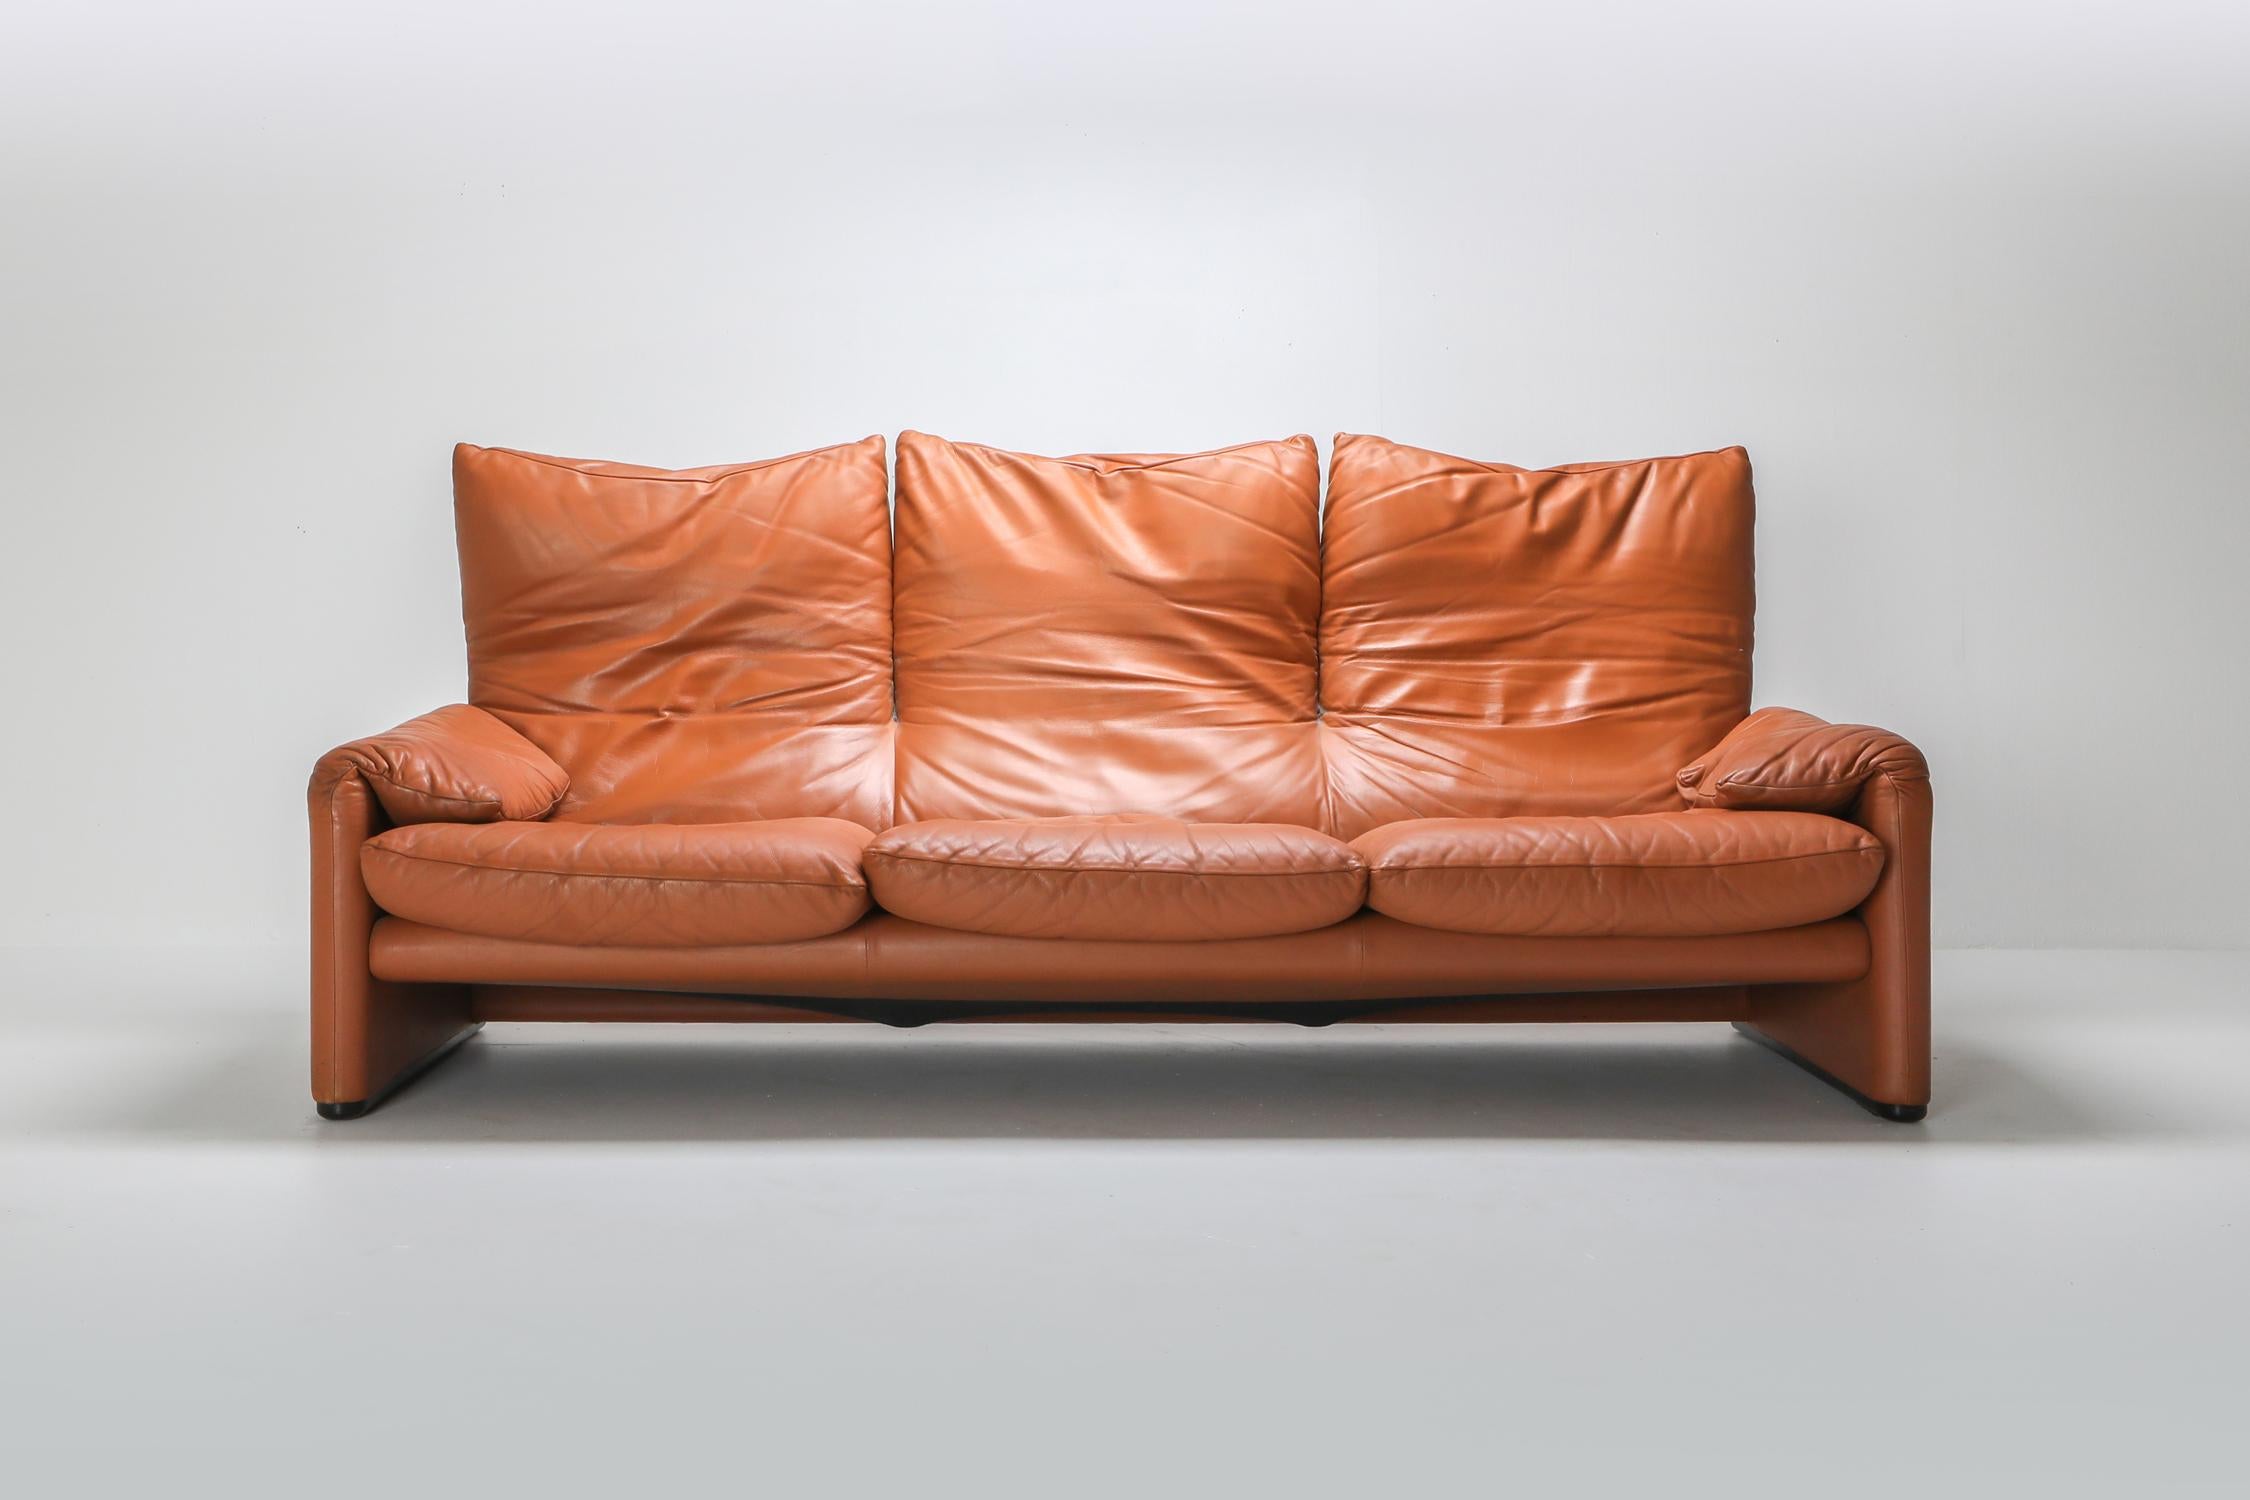 European Maralunga Cognac Leather Couch by Vico Magistretti for Cassina, 1974